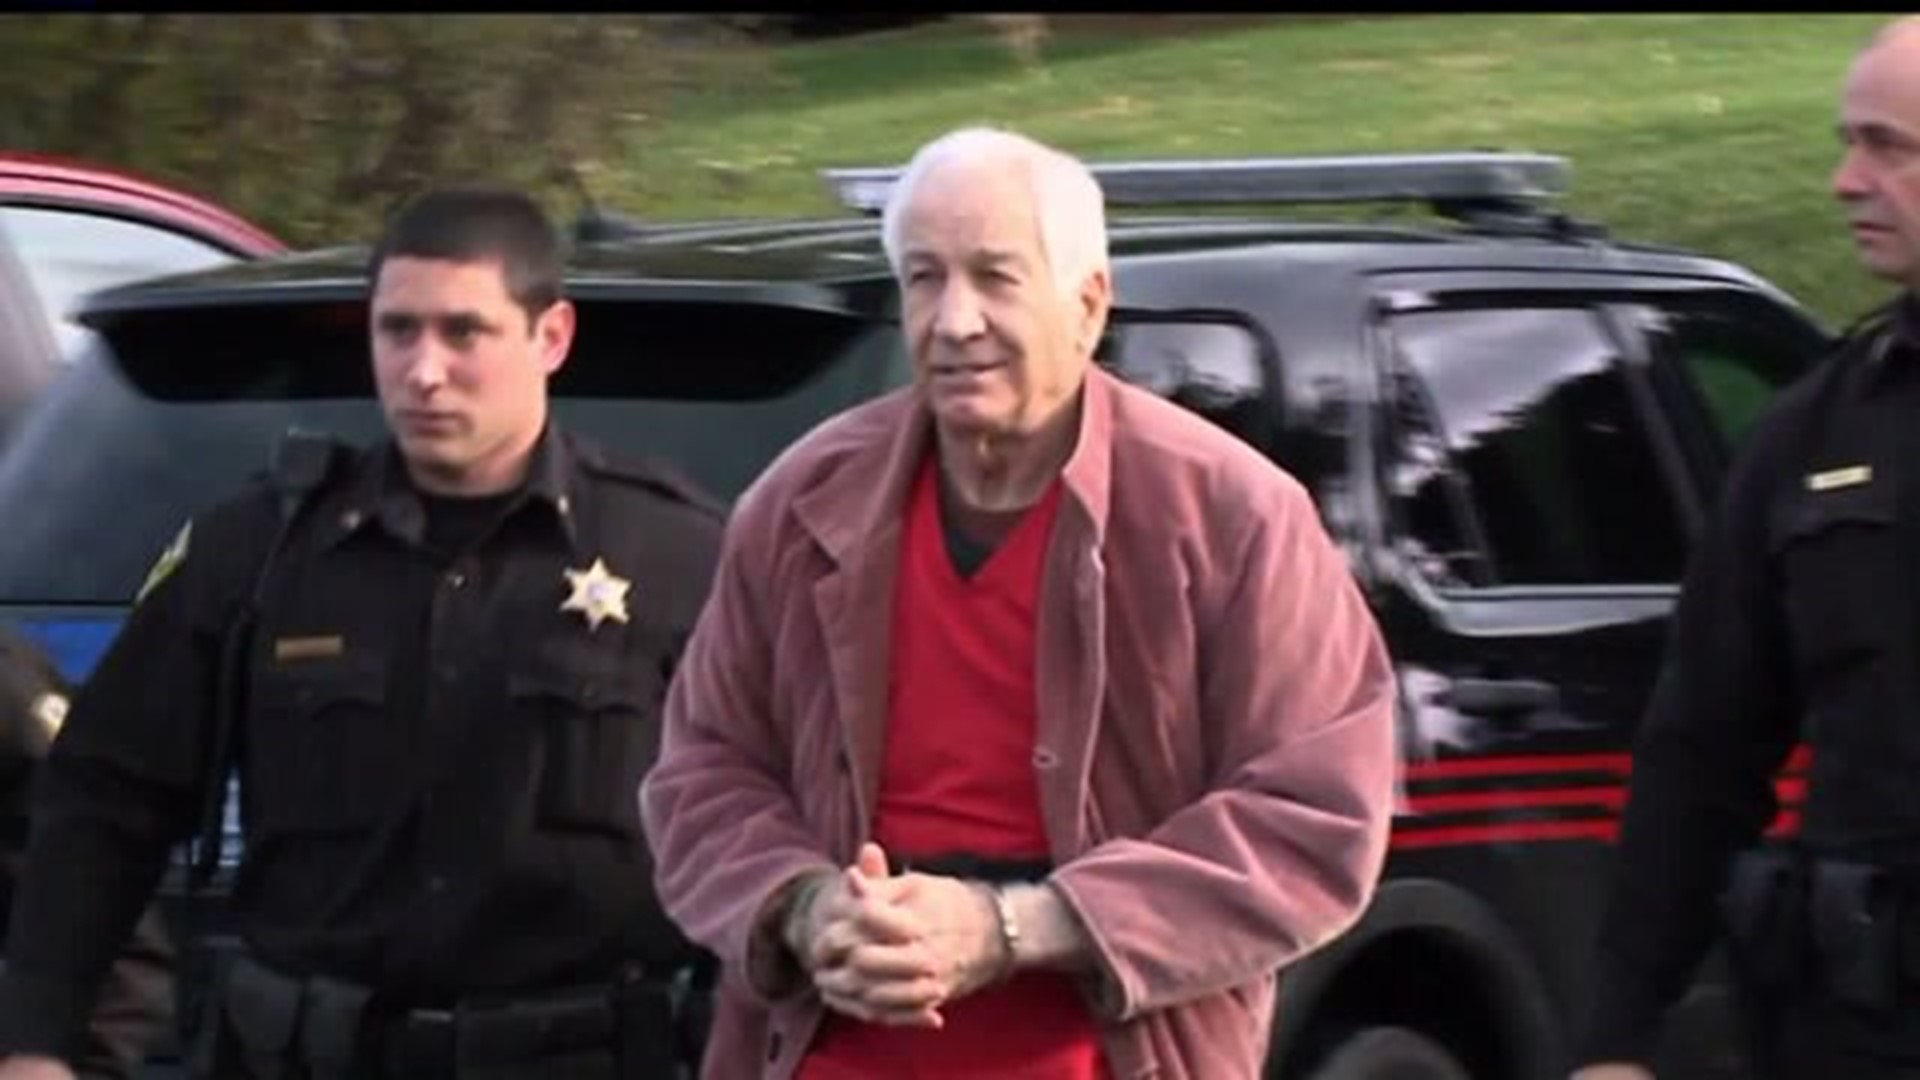 Former Penn State assistant football coach Jerry Sandusky is expected to testify at his appeals hearing today